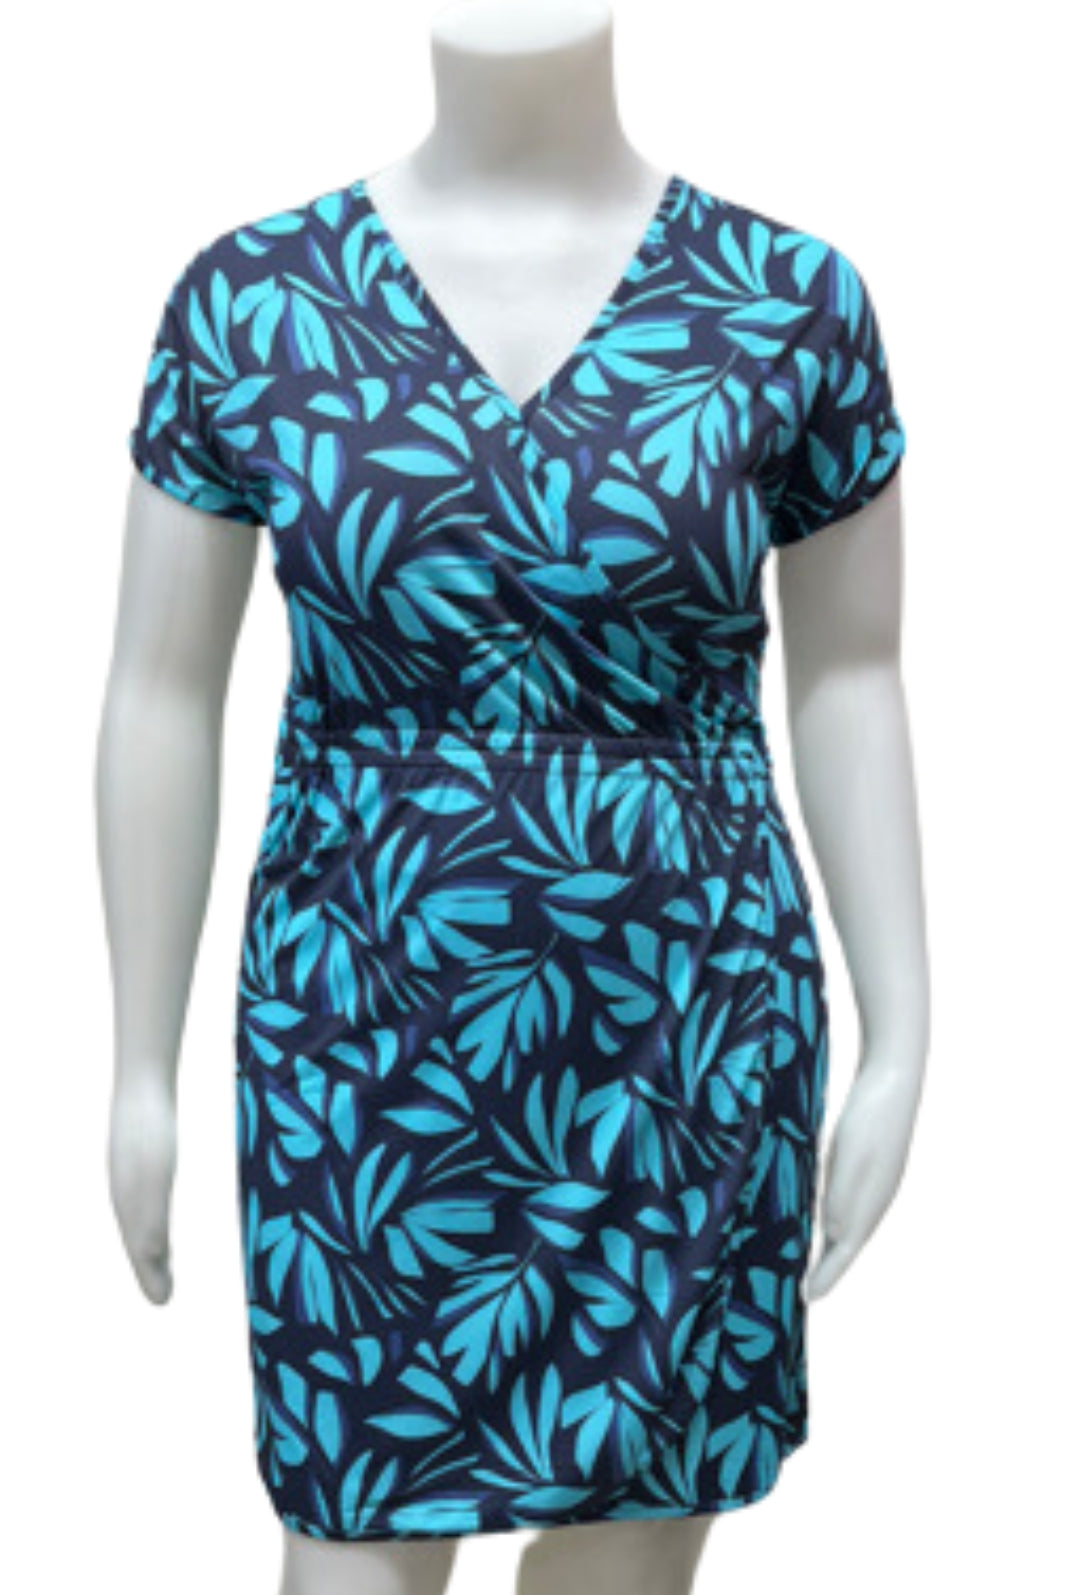 Wrap dress Chill River Plus Size by Columbia